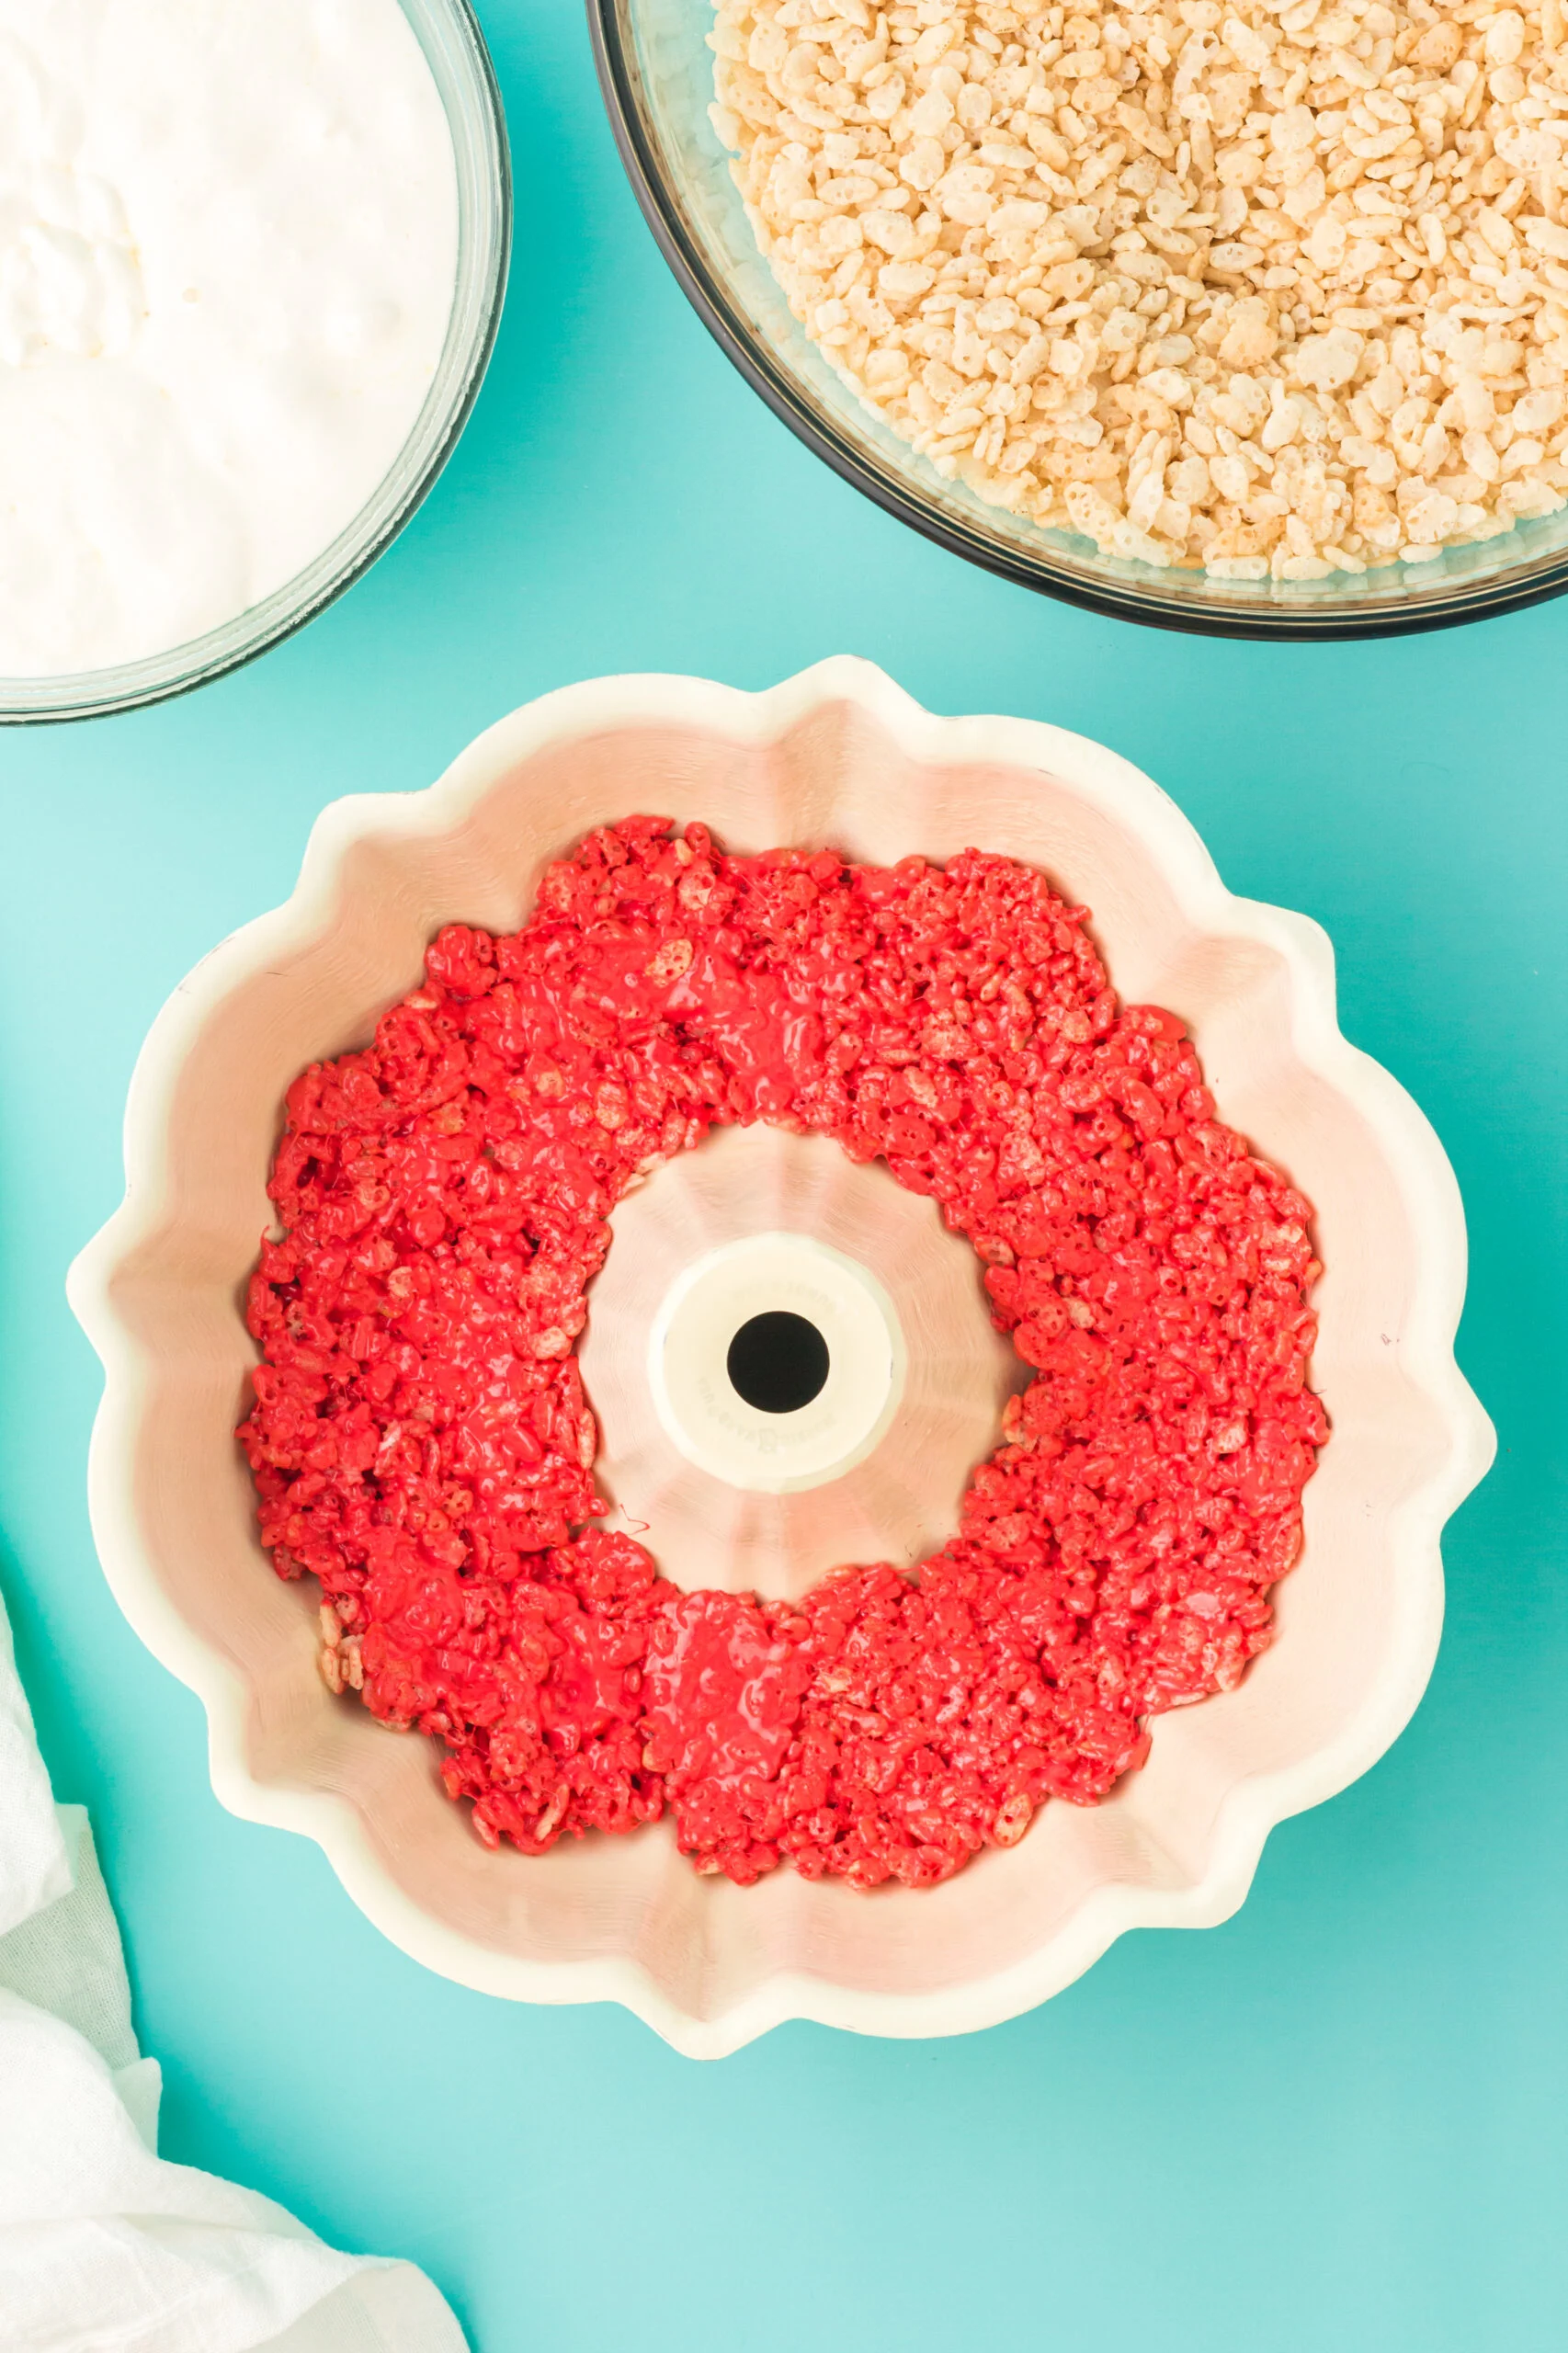 a red layer of rice krispies treats pressed into base o a bundt pan to make a rainbow cake